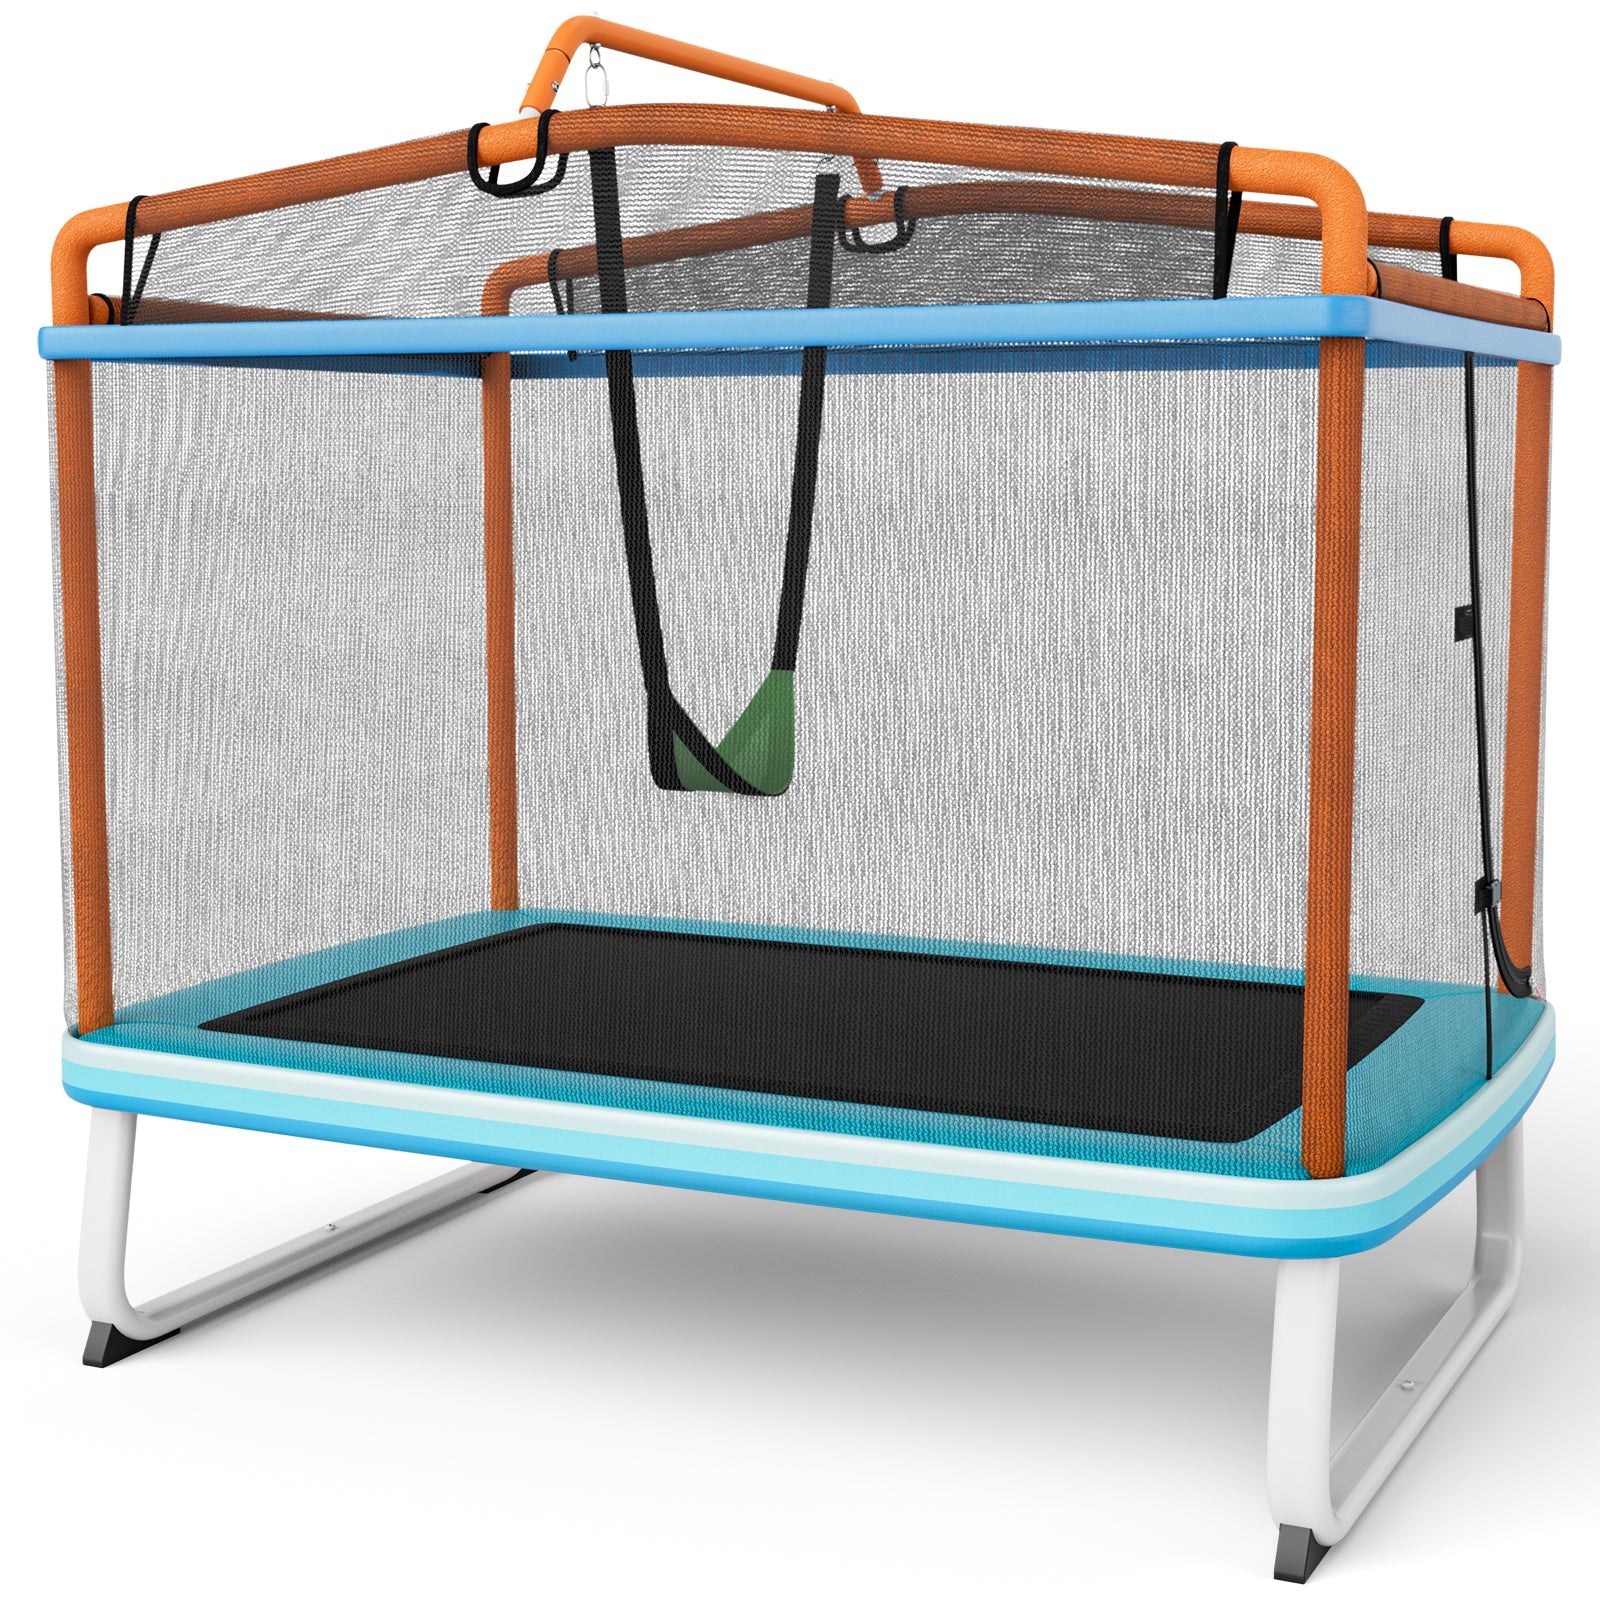 Play and Swing: 3-in-1 Rectangle Trampoline with Swing & Horizontal Bar Orange